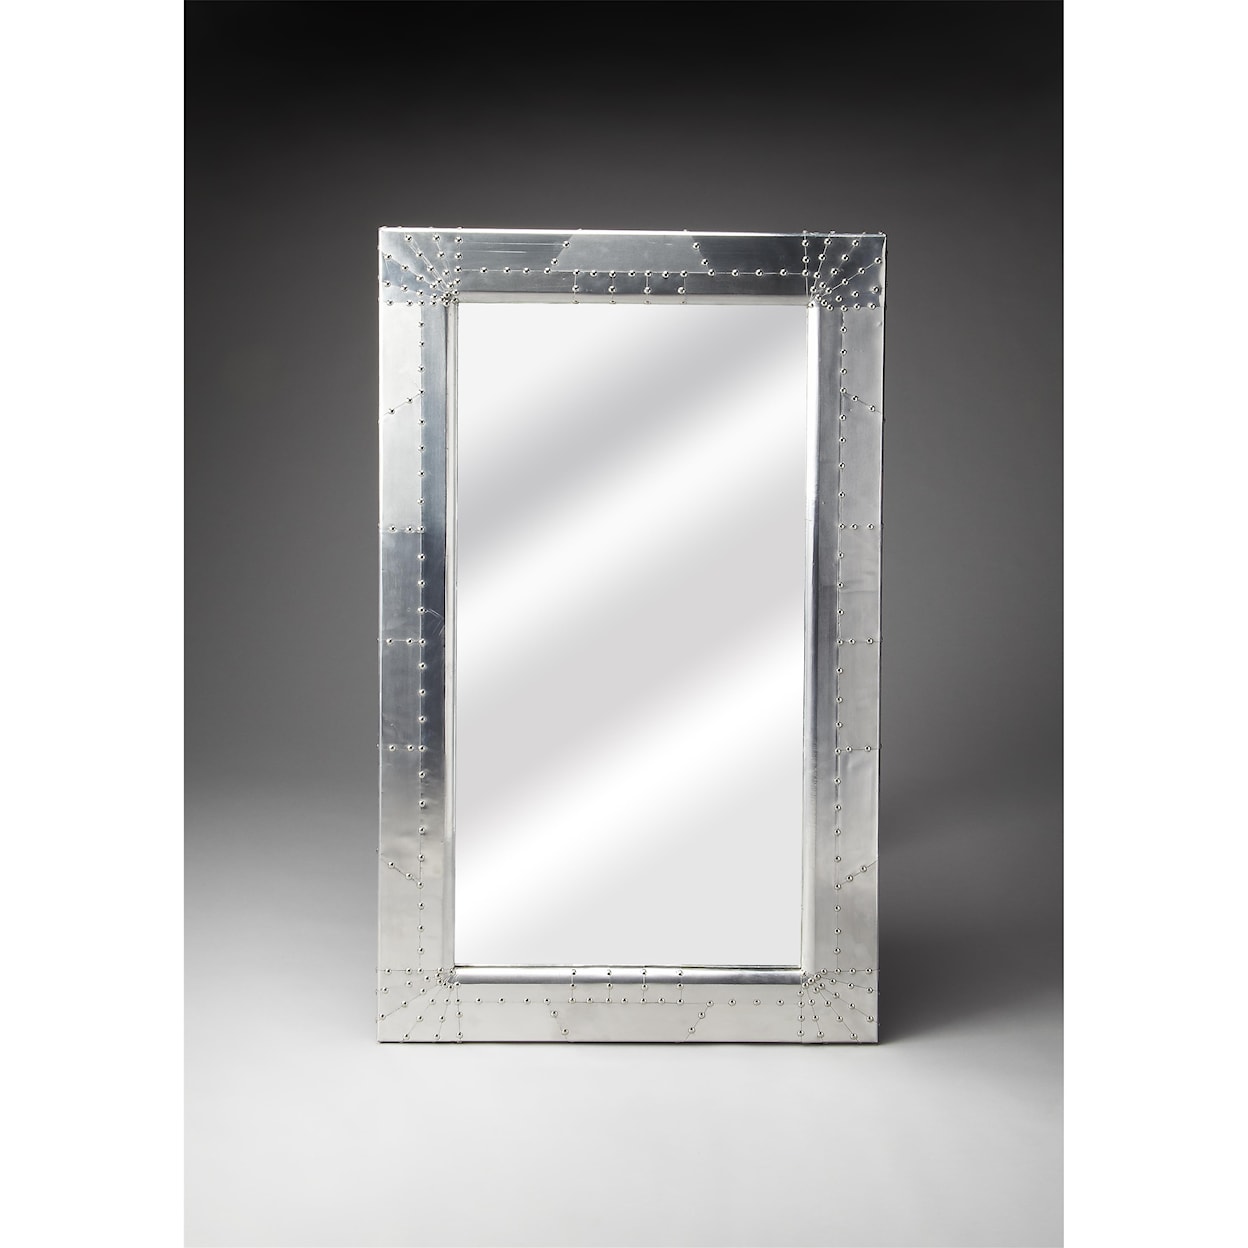 Butler Specialty Company Industrial Chic Wall Mirror